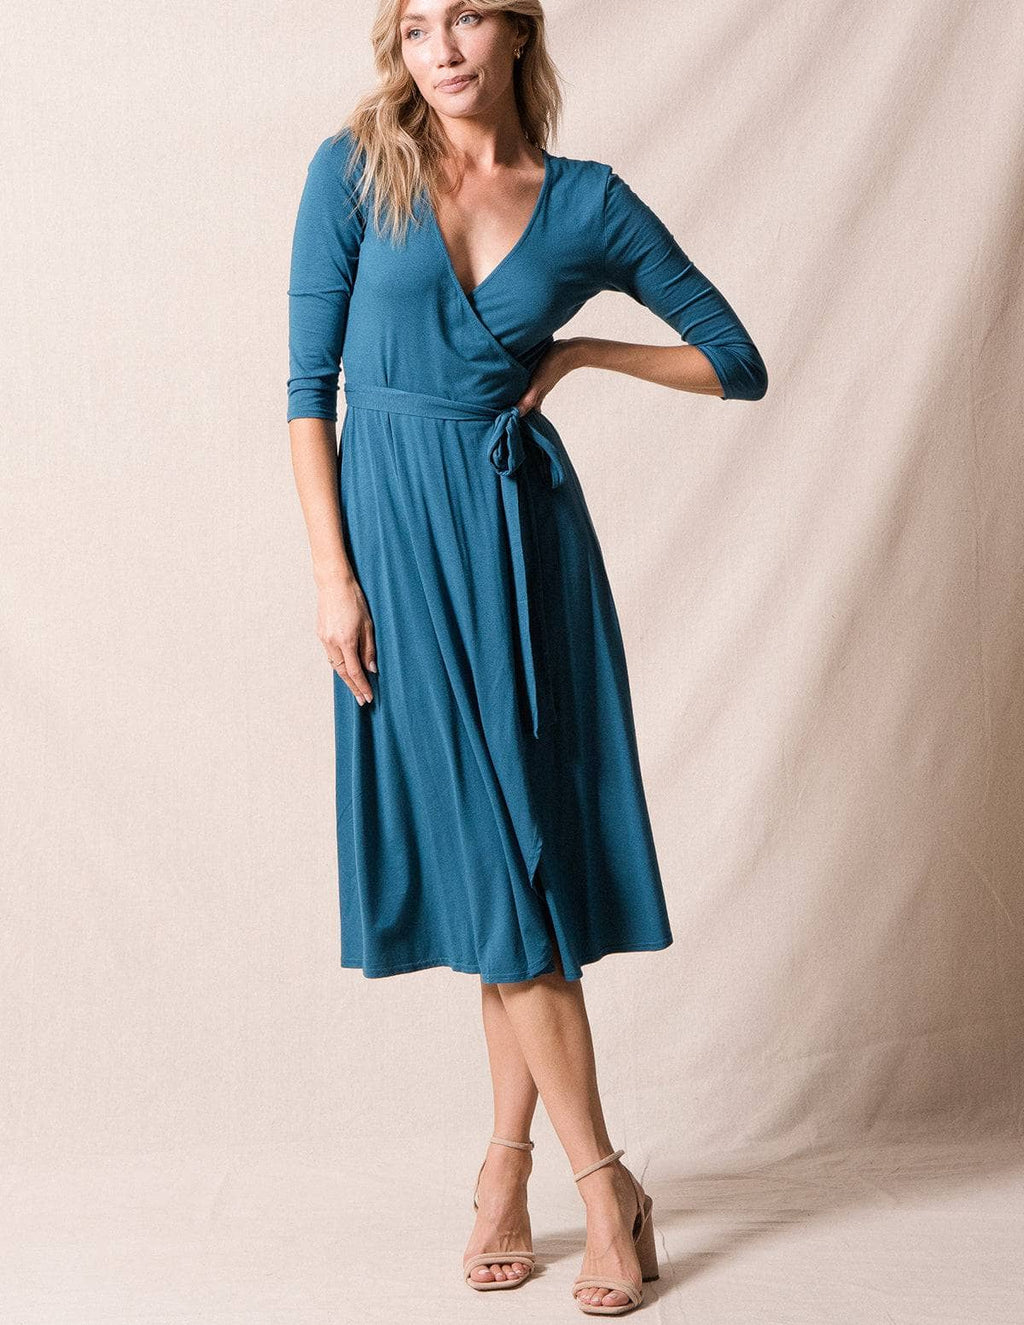 Bamboo / Organic Cotton Wrap Dress - Pacific - Large and XL Only — Sivana